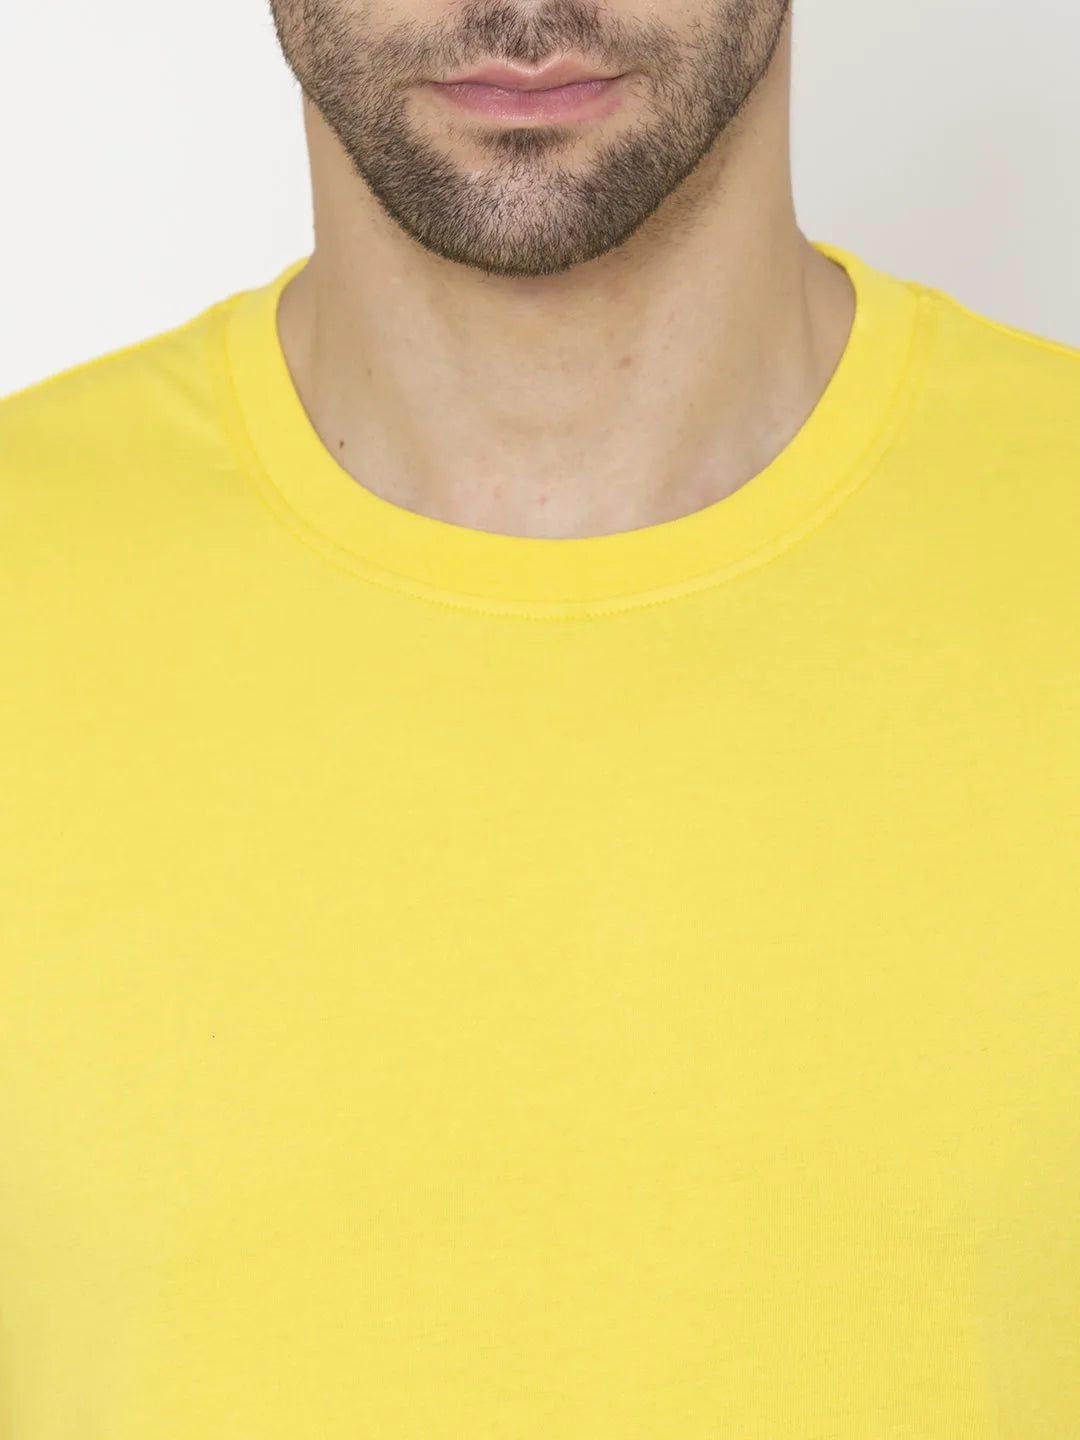 Flawless Men's Basic Yellow T-shirt Bright | MONDEY Being Flawless